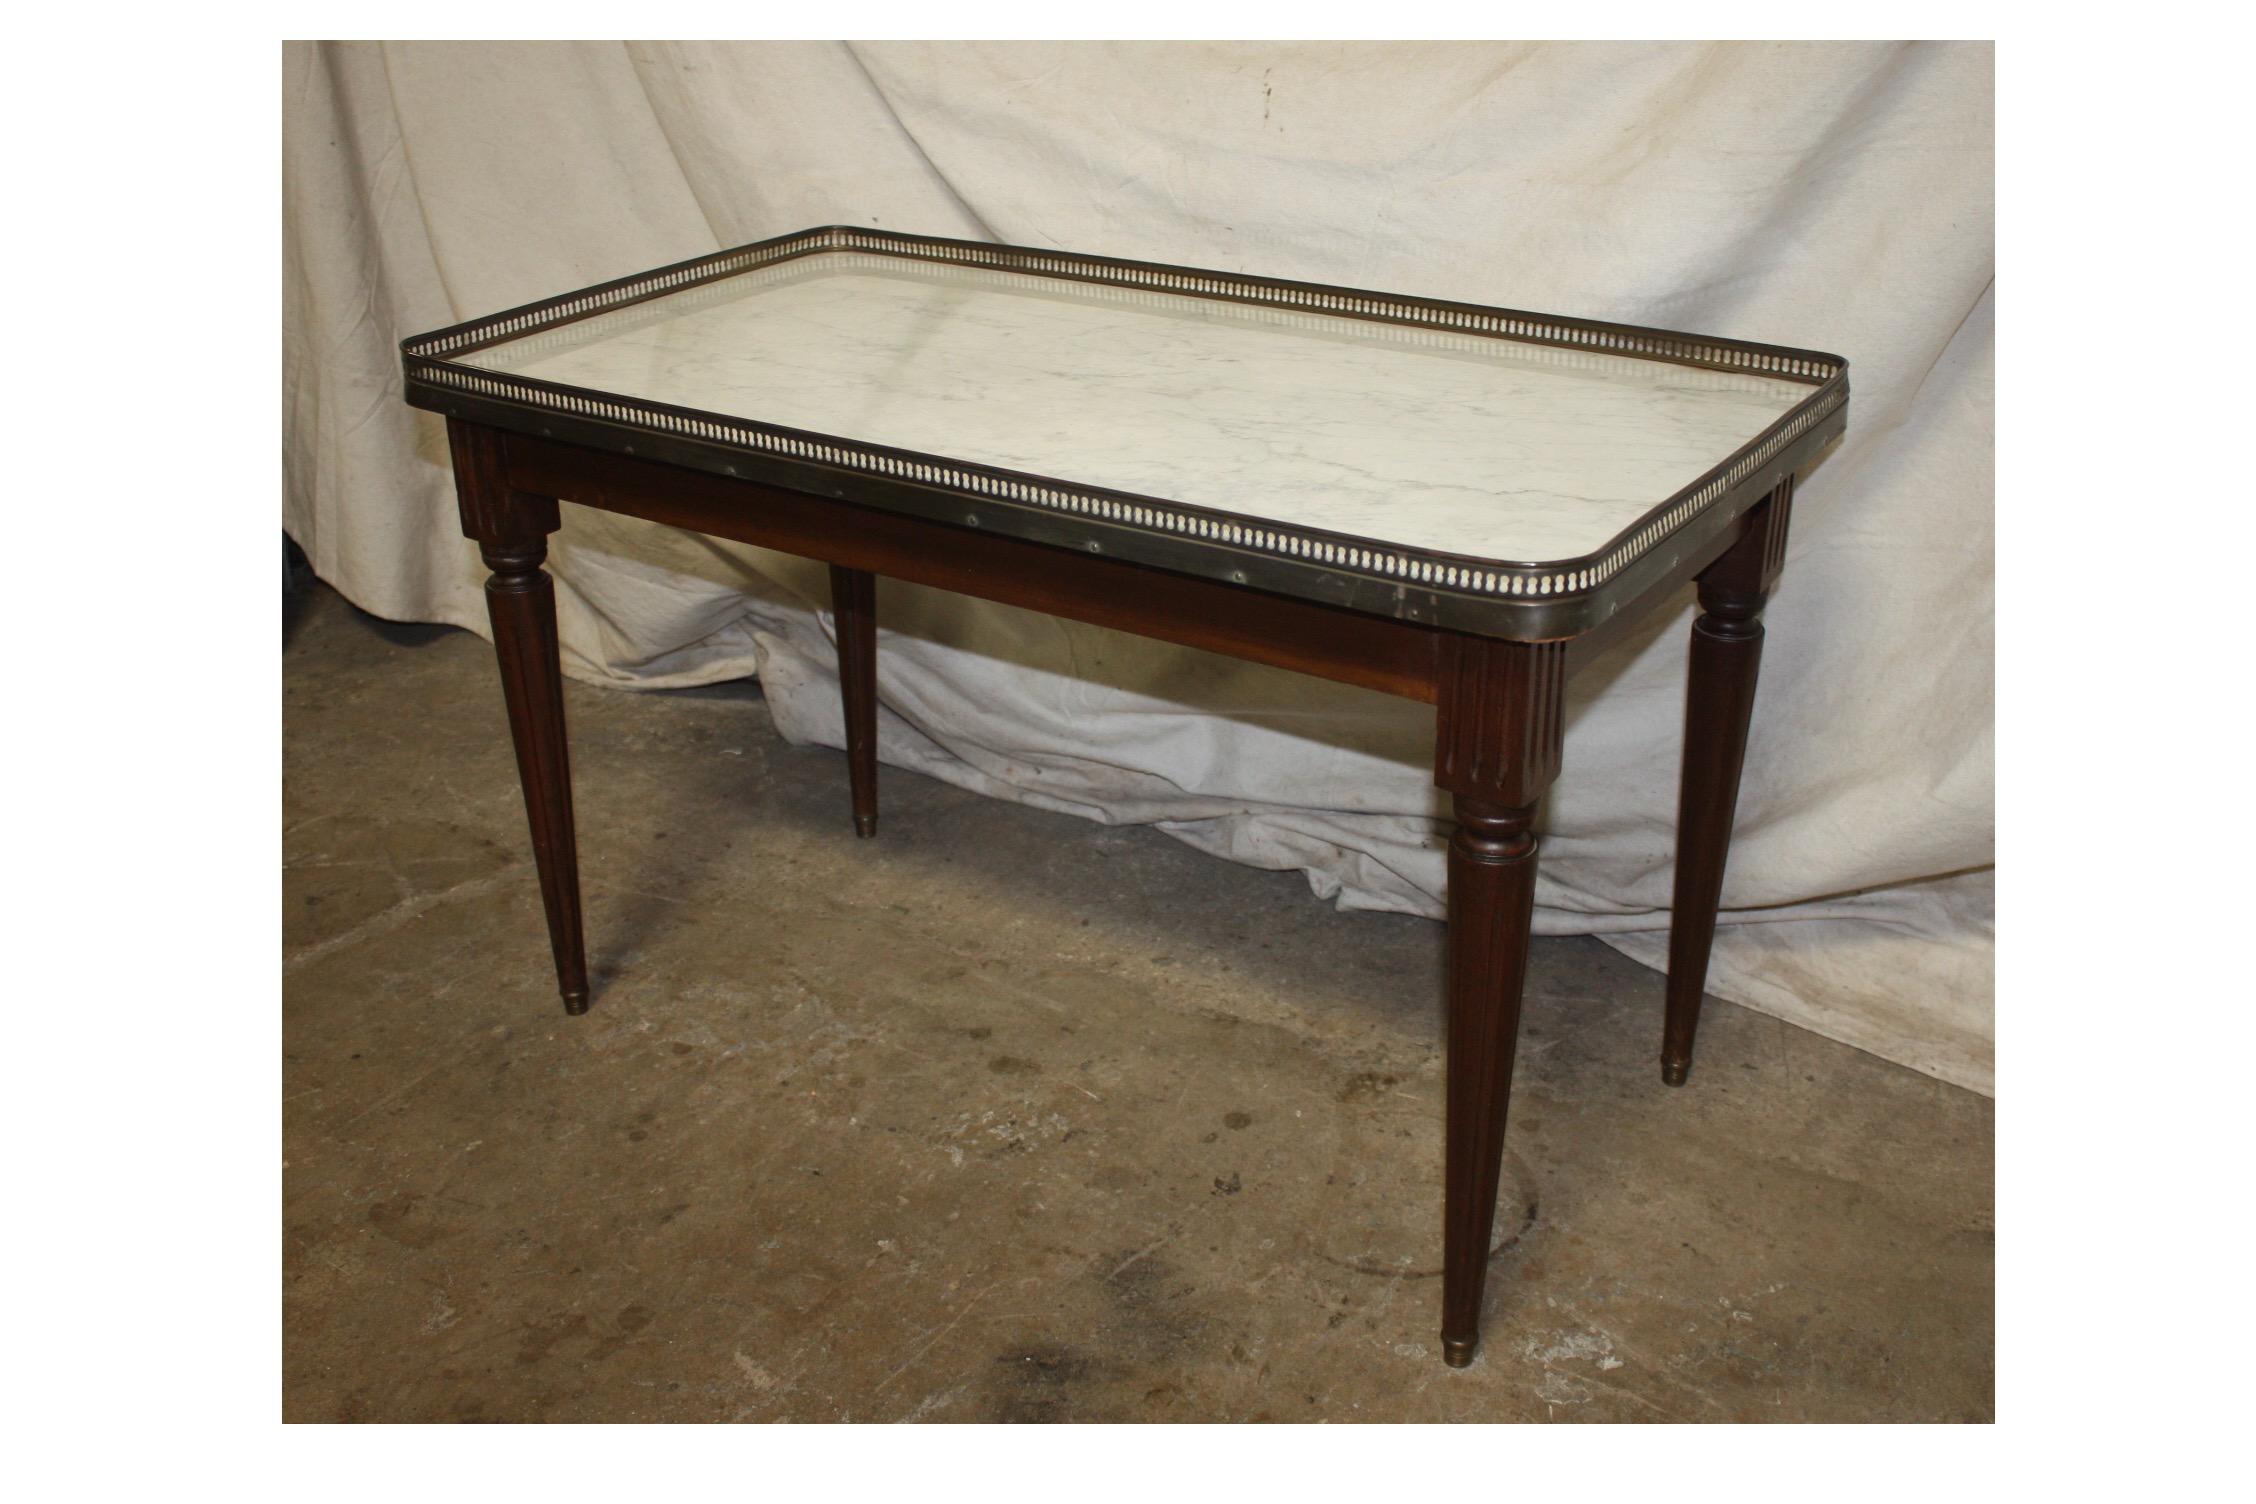 Charming French Louis XVI Style Table In Good Condition For Sale In Stockbridge, GA